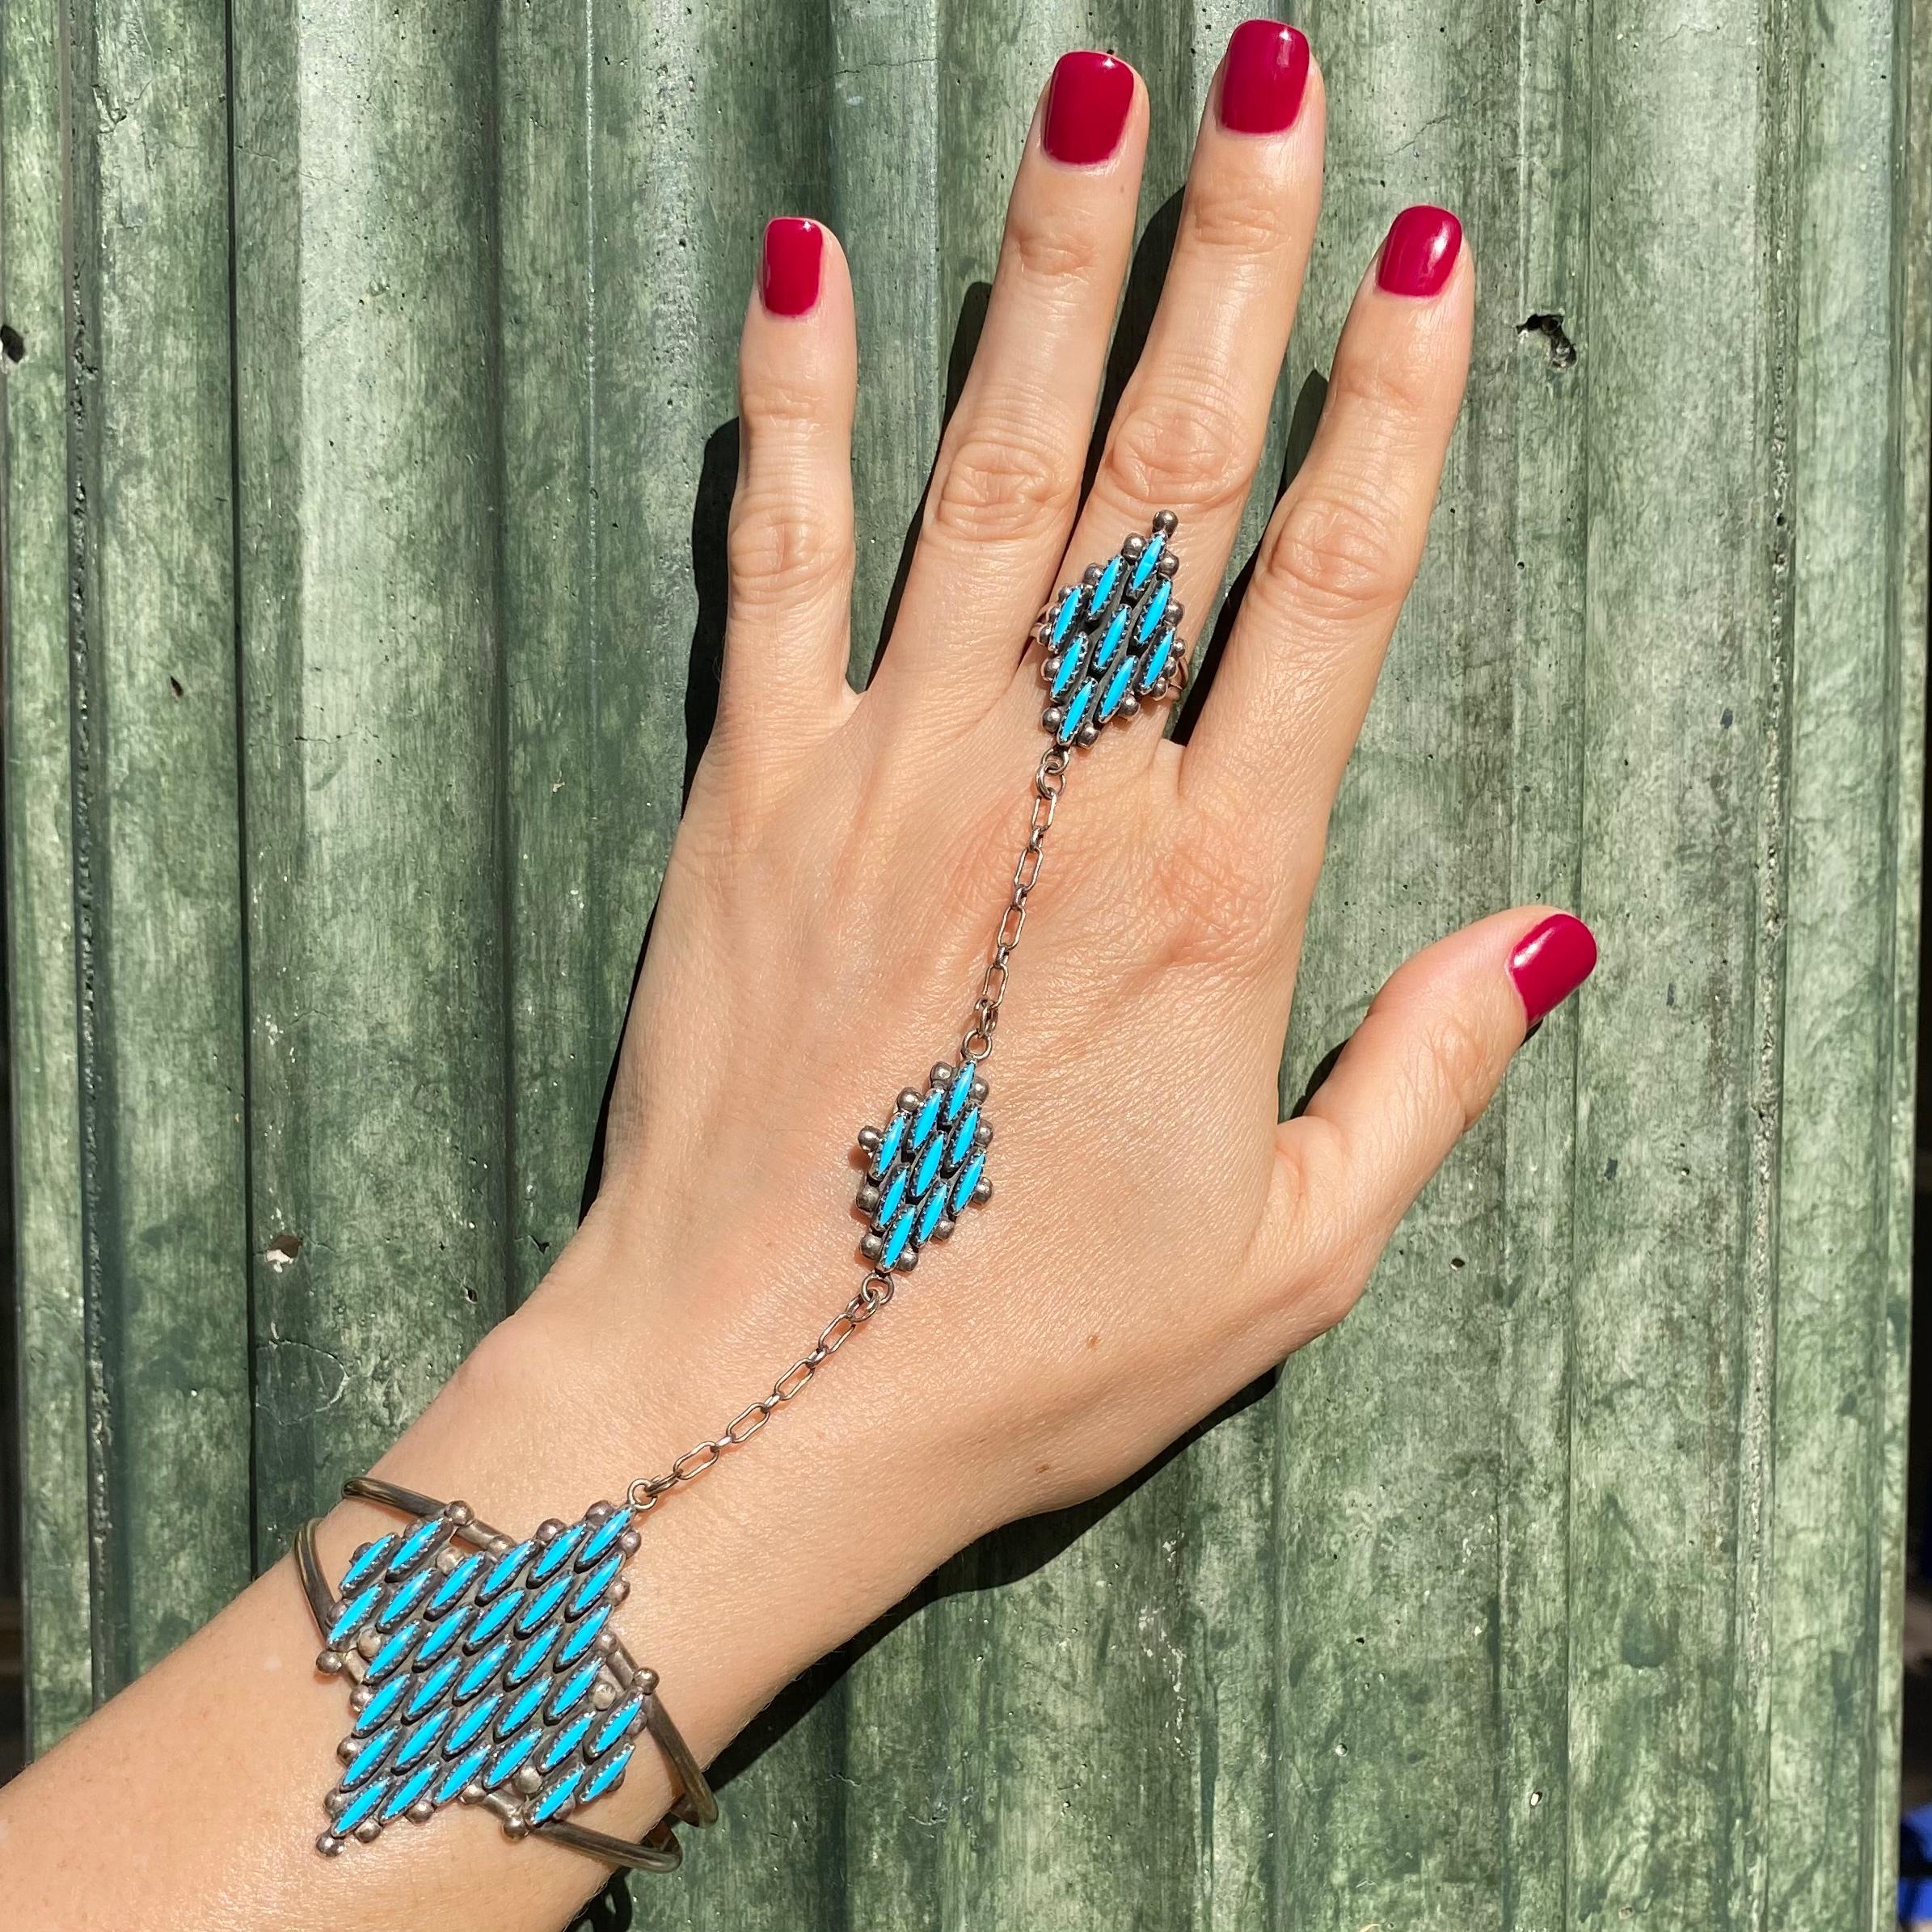 Native American Zuni Turquoise Petit Point attached Bracelet and Ring ensemble. Hand set with Petit Point Turquoise and crafted in 925 Sterling Silver. Ring size: 7.75. A popular style for Cher, Streisand and the Kardashians! Each station is dressed